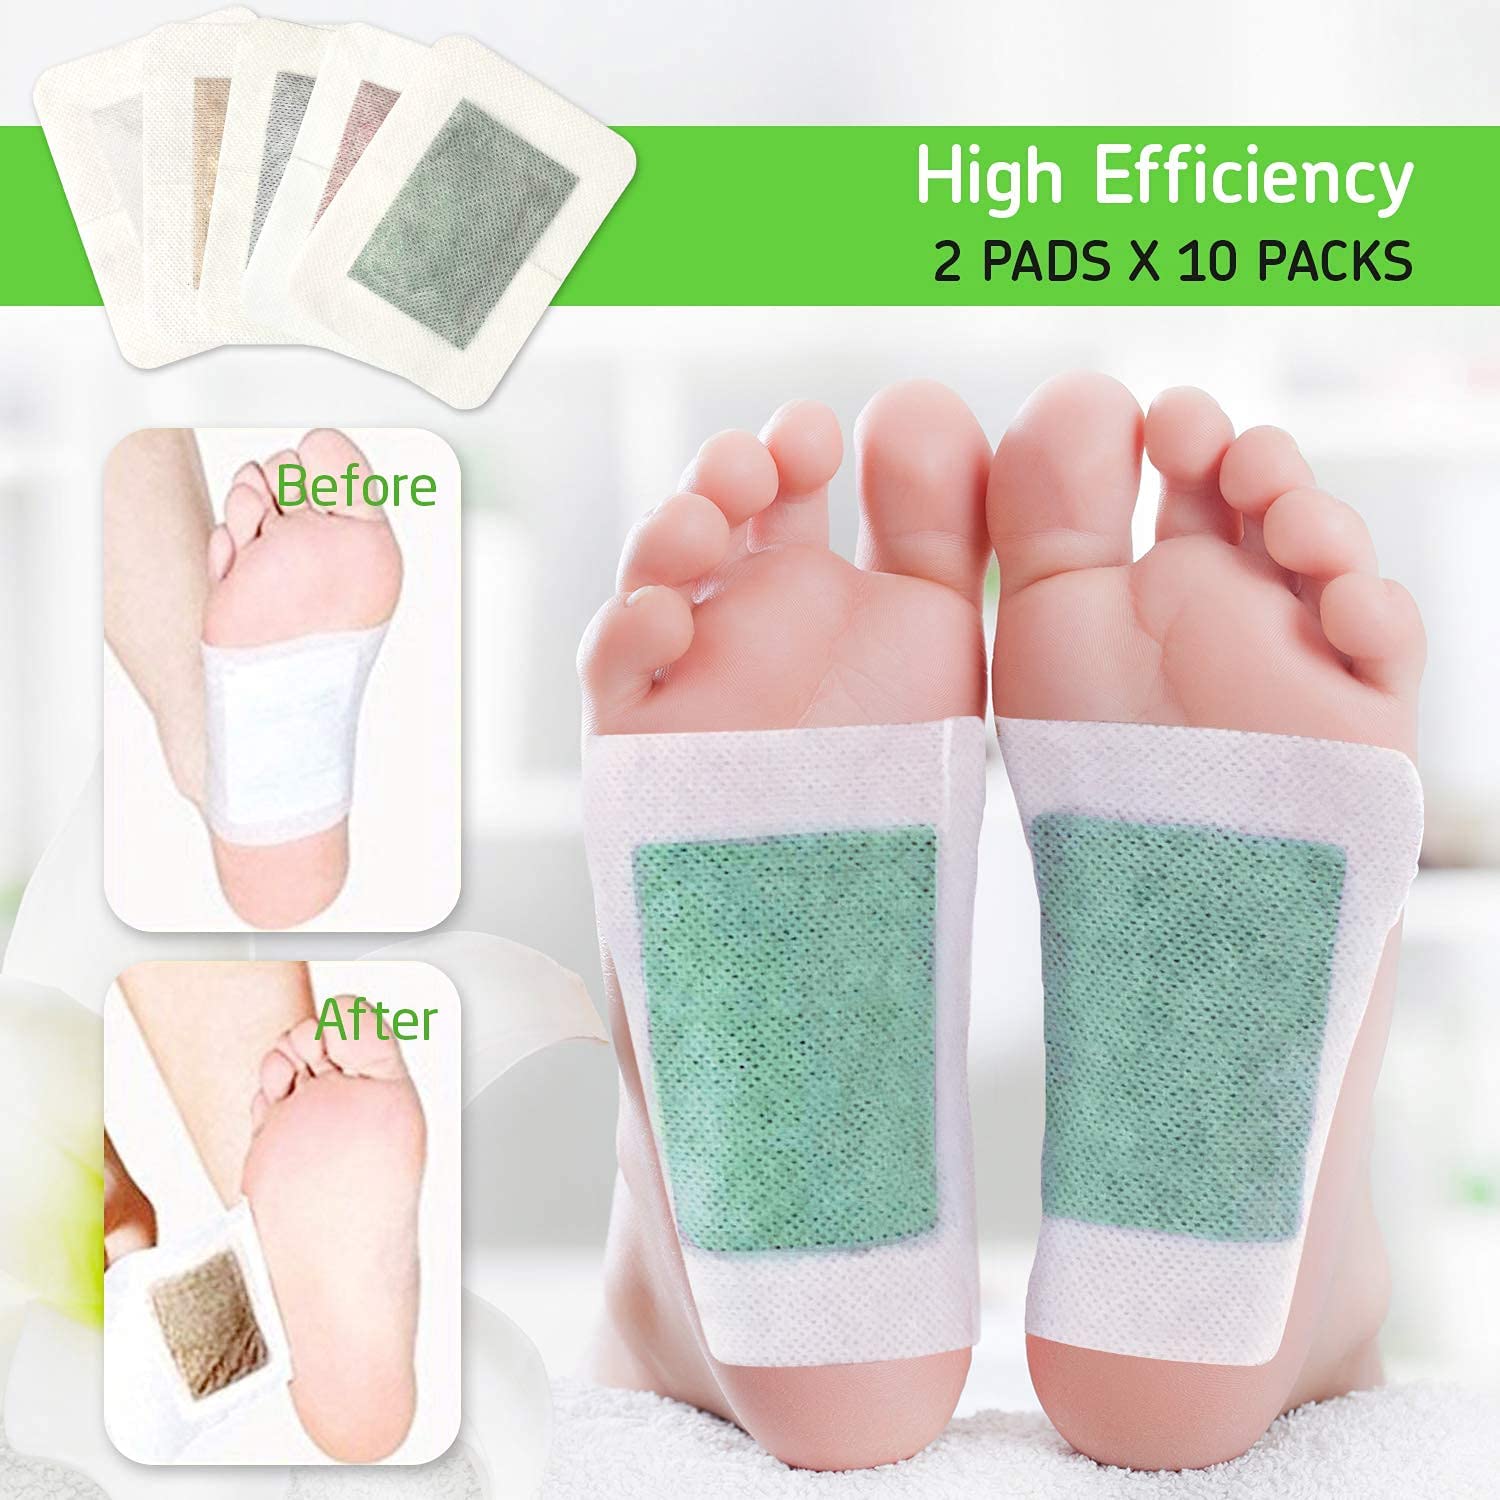 Heating Pads For Healthcare Natural Herbal Bamboo Ginger Wood Relax Detox Foot Patch